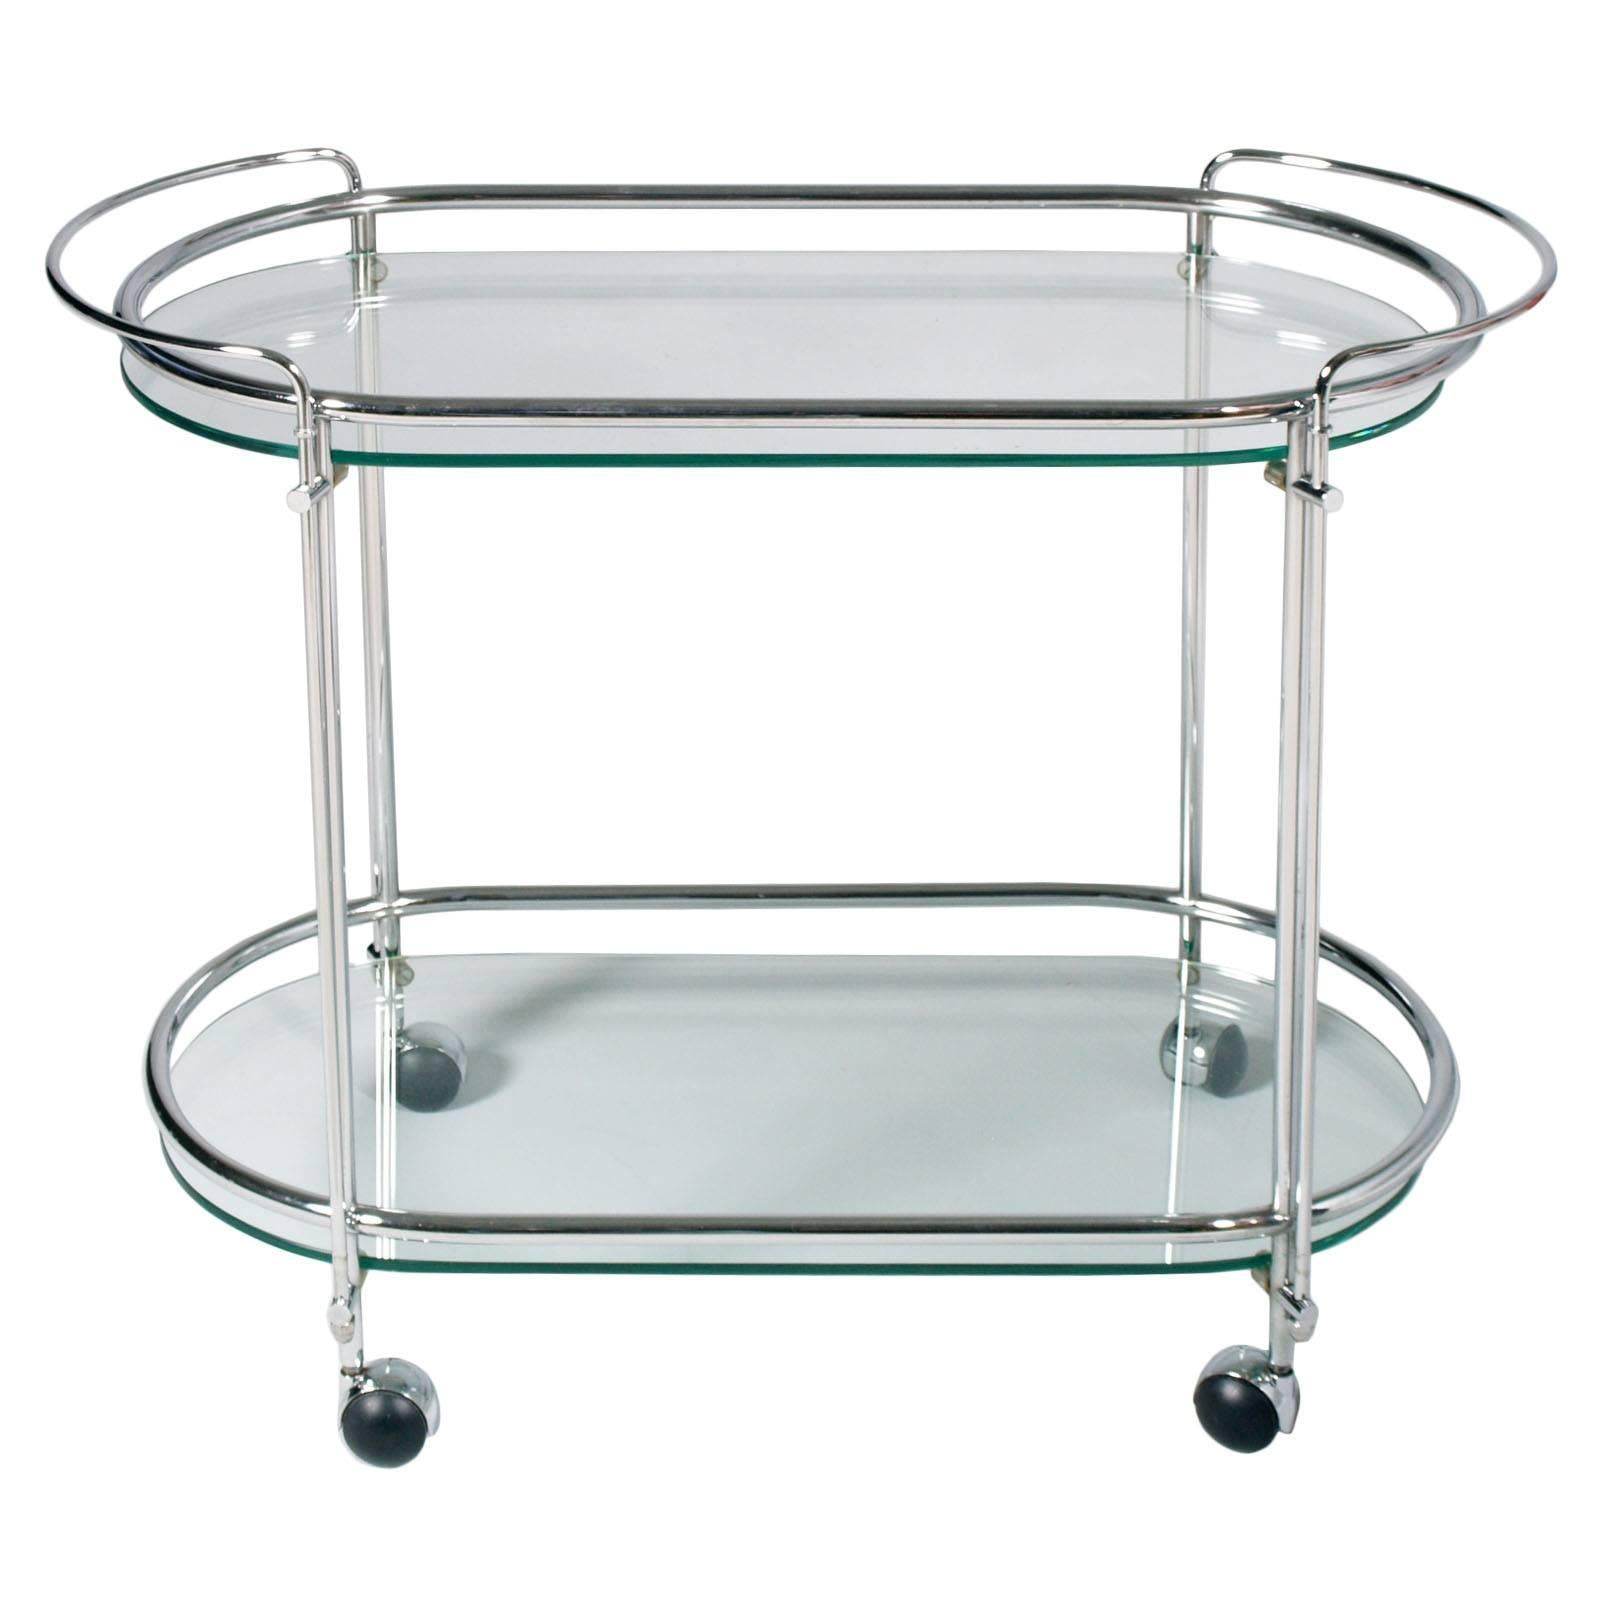 1950s Italian Mid Century bar cart in  chromed brass  and cristal , Gallotti e Radice attributed

This stylish two-tiered drinks trolley is in crystal and brass chrome and was made in the 1950s. It is oval shaped with four wheels chrome castors with